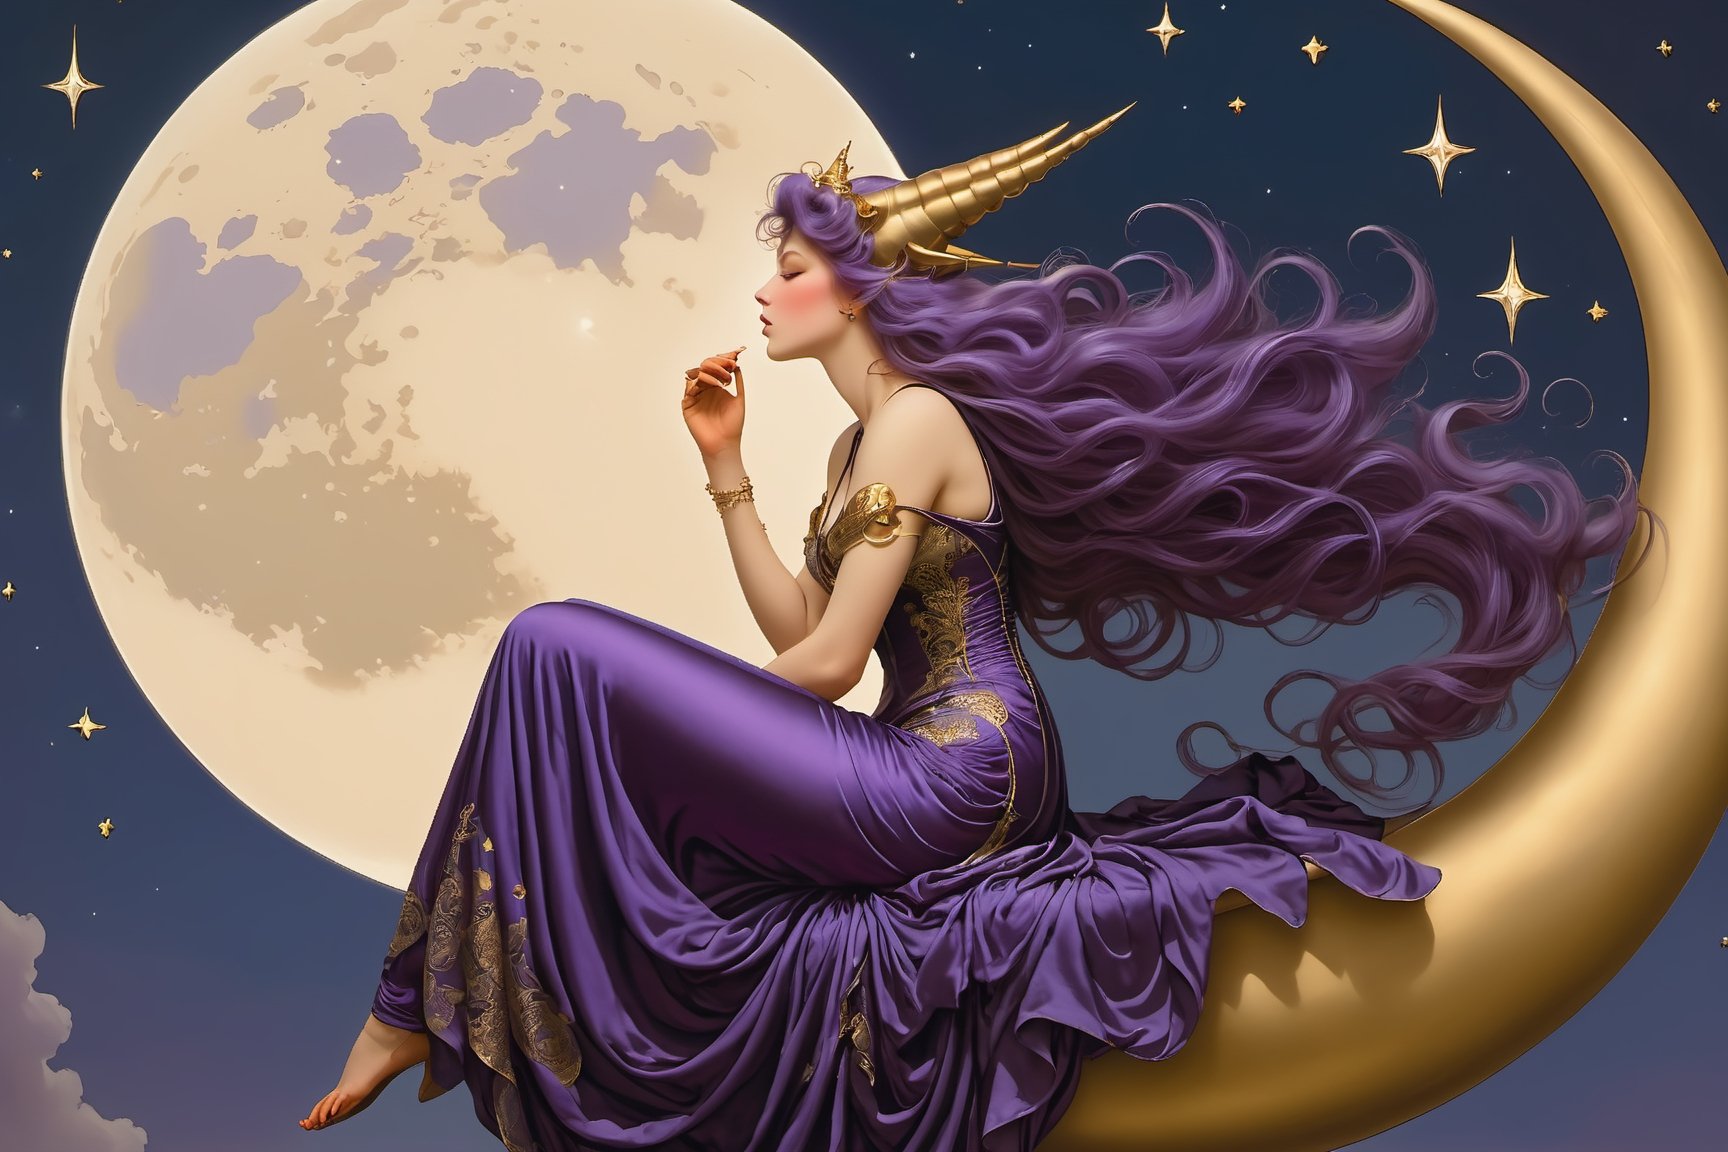 side view. full body shot, extreme long shot,  michael parkes style, pre-raphaelite, a beautiful young magical witch woman with long purple hair is sitting on a shiny golden crescent moon in the night sky. she is wearing an elaborate purple silk gown with intricate gold embroidery patterns. a gargoyle is flying near the moon and woman. stars are in the sky. glowing obs of various sizes are floating in the sky,  michael parkes, artist study hands. ,1girl,Masterpiece,SD 1.5,realistic